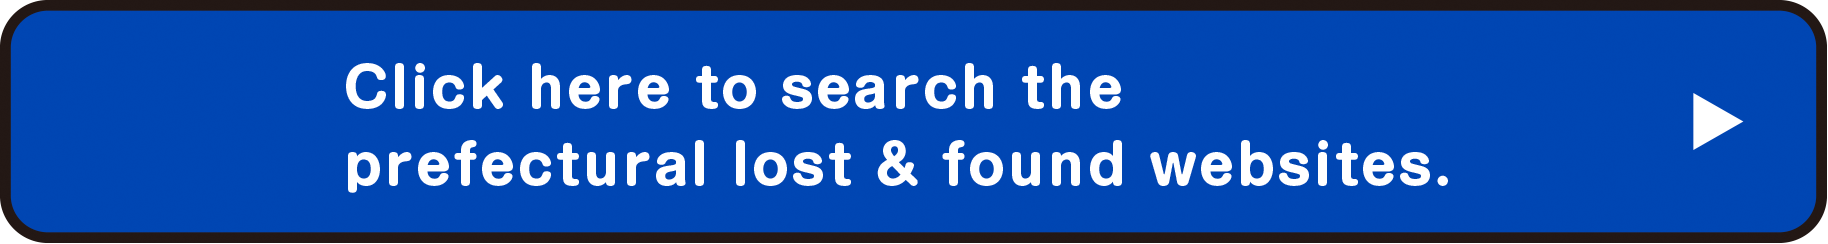 Click here to search the prefectural lost & found websites.